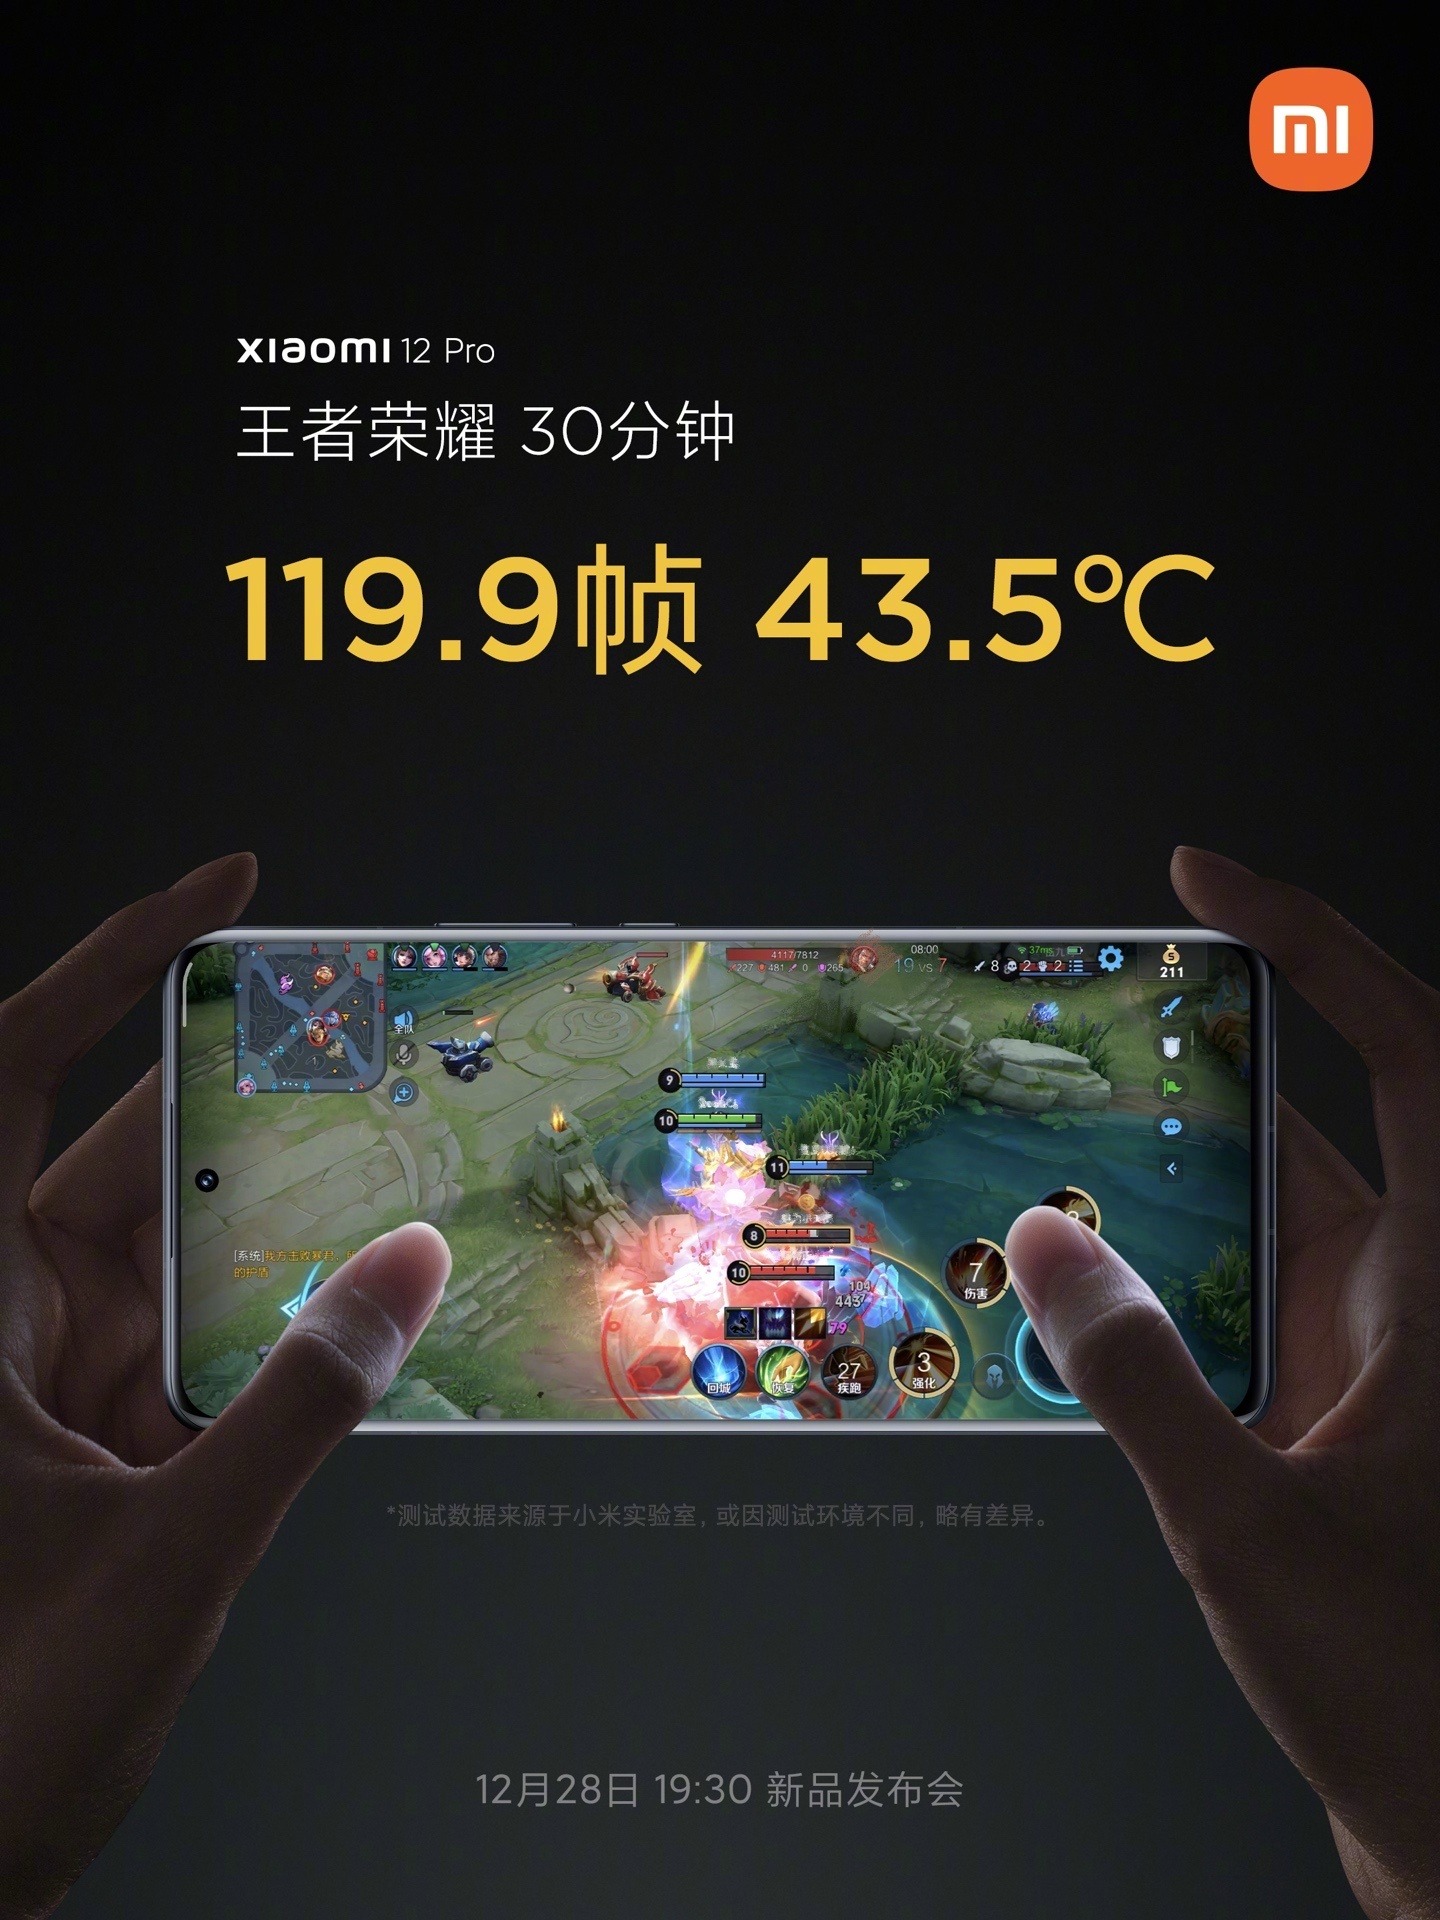 Xiaomi 12 Pro will make gamers happy: 43.5°C after intense gaming